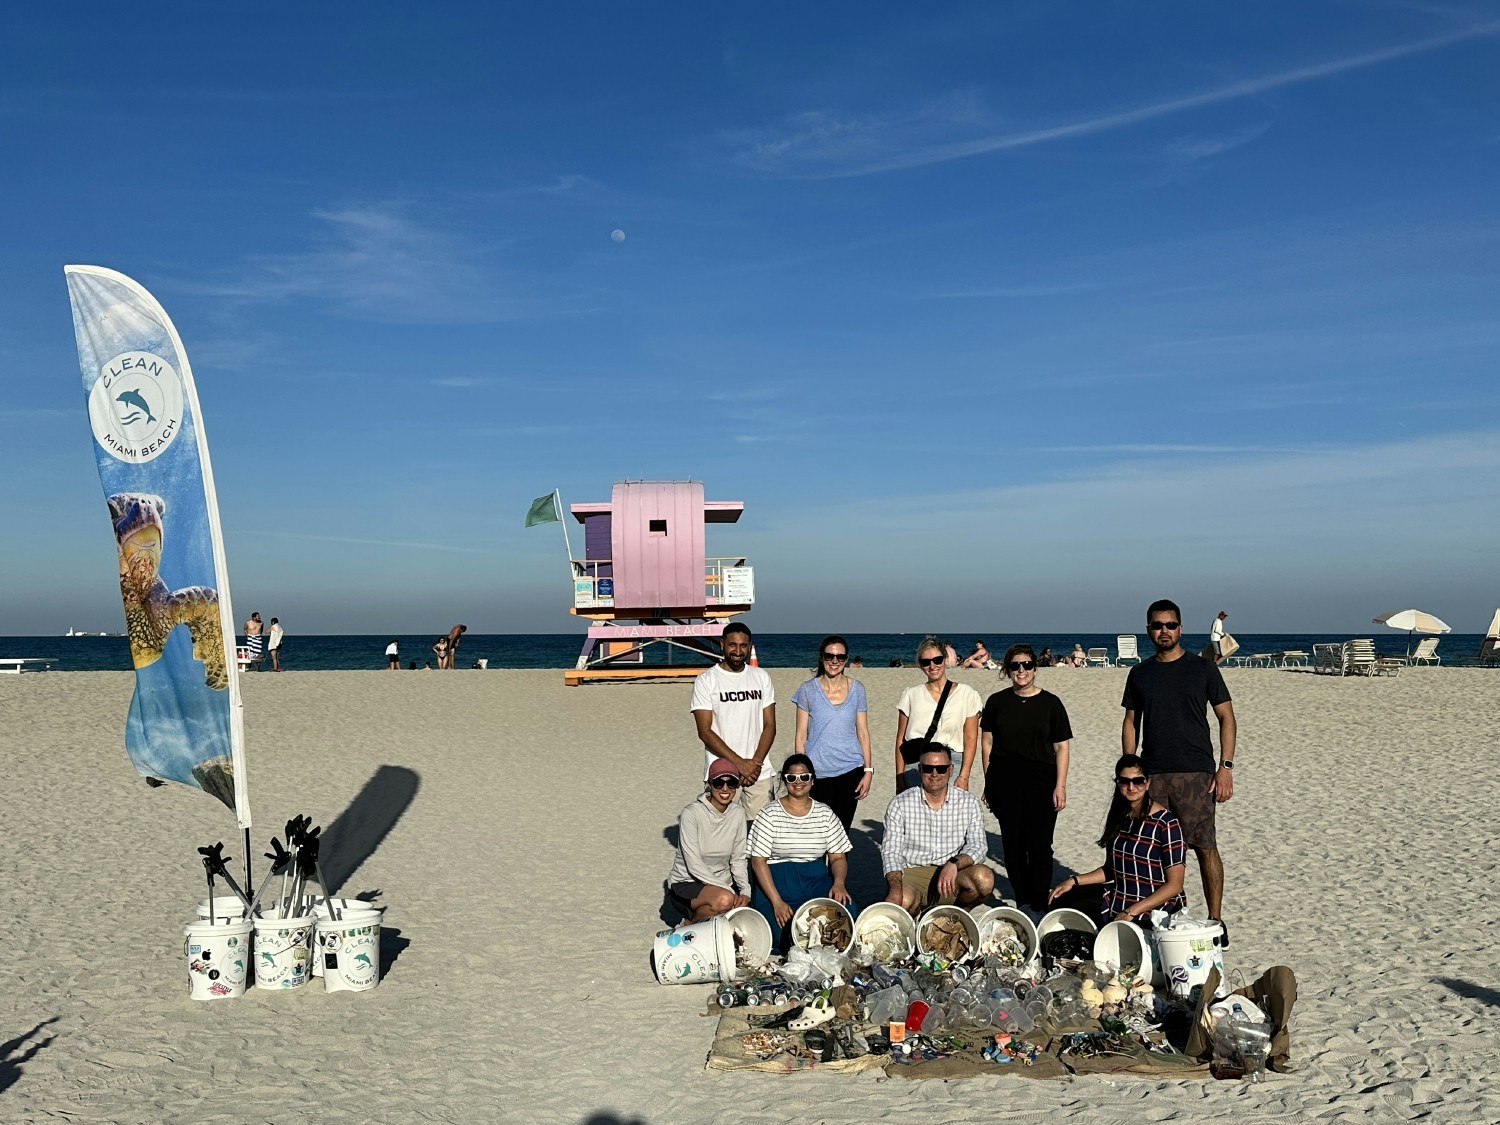 Arya team partnering with Clean Miami Beach for a beach clean-up. 60 pounds of litter collected in just under two hours!